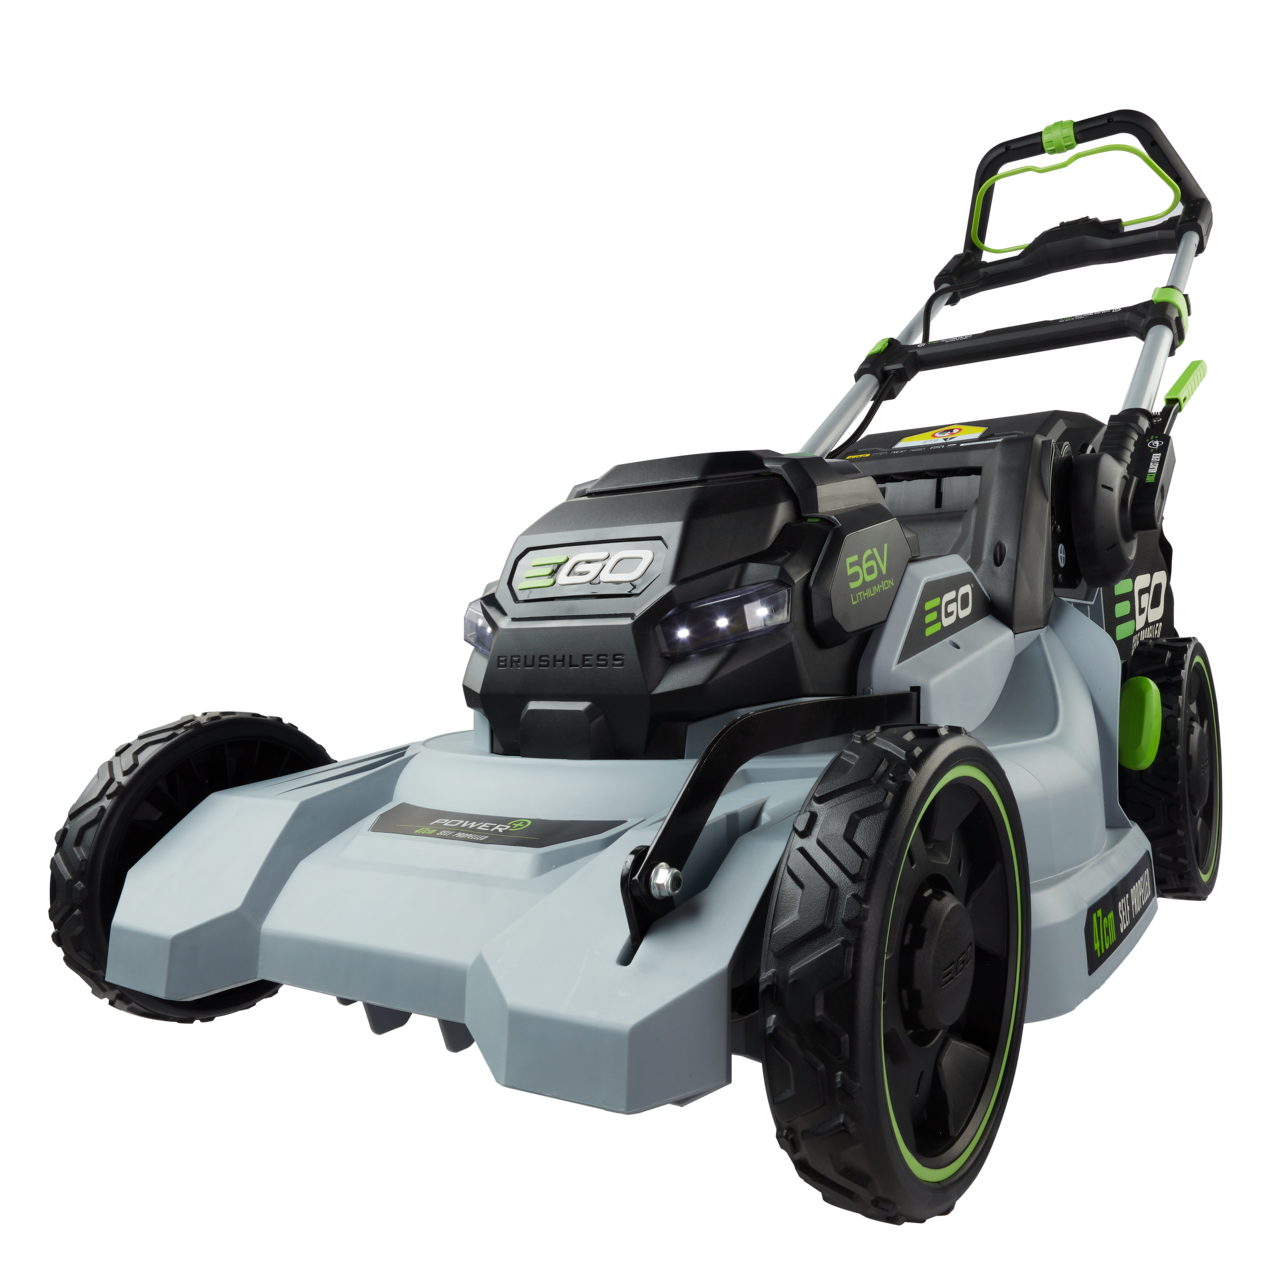 ego-lm1903e-sp-self-propelled-mower-kit-with-rapid-charger-and-5ah-battery